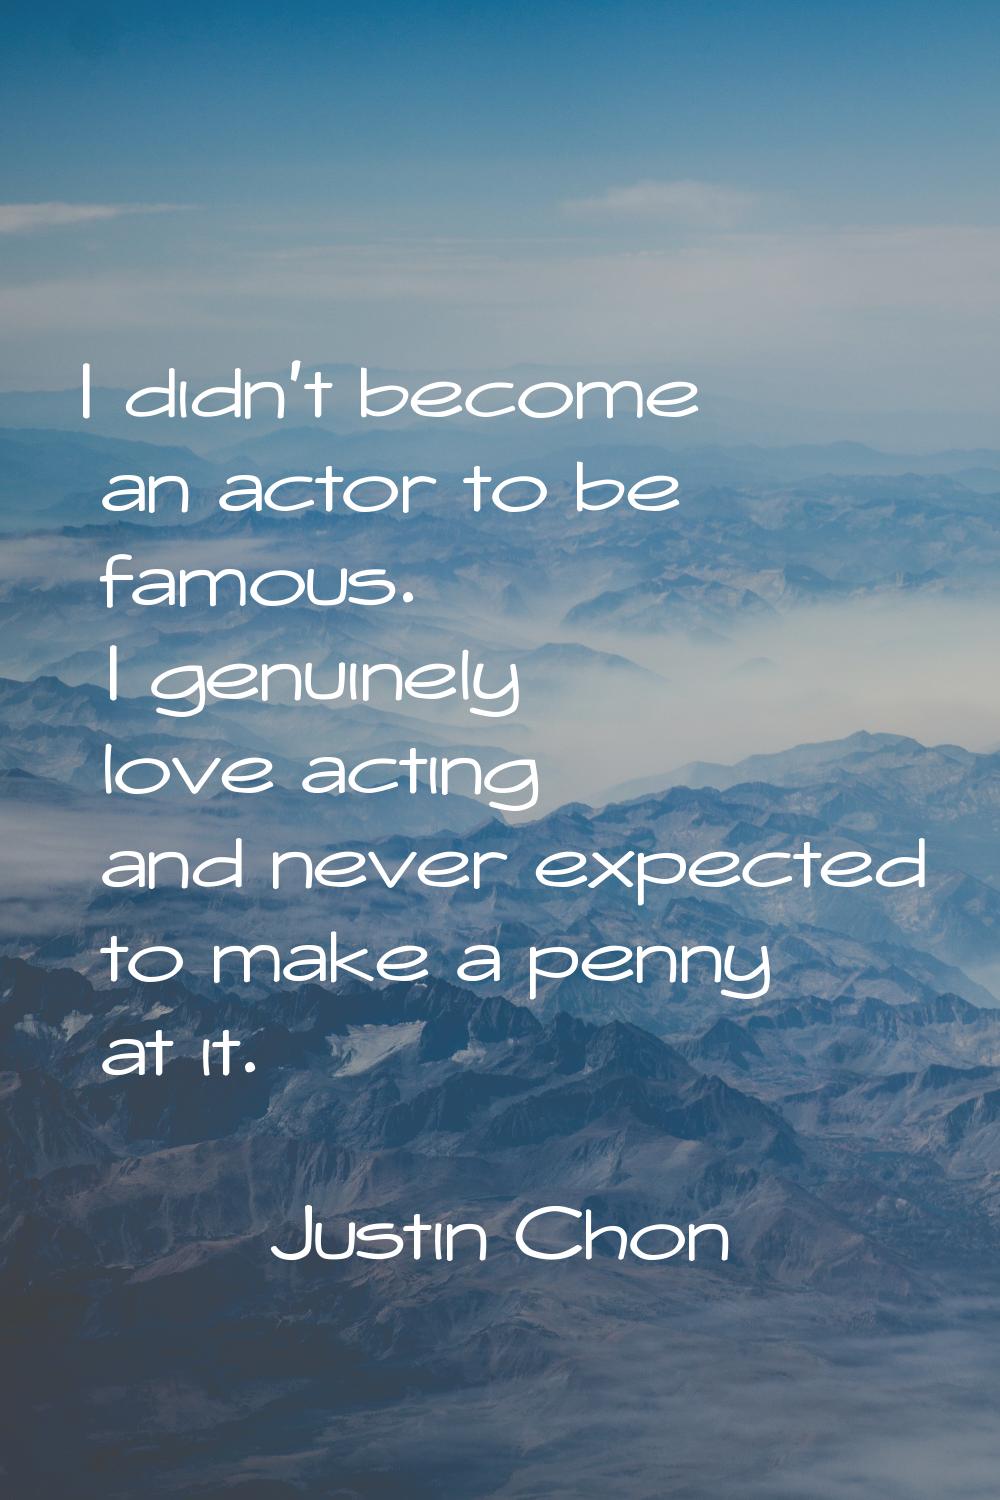 I didn't become an actor to be famous. I genuinely love acting and never expected to make a penny a